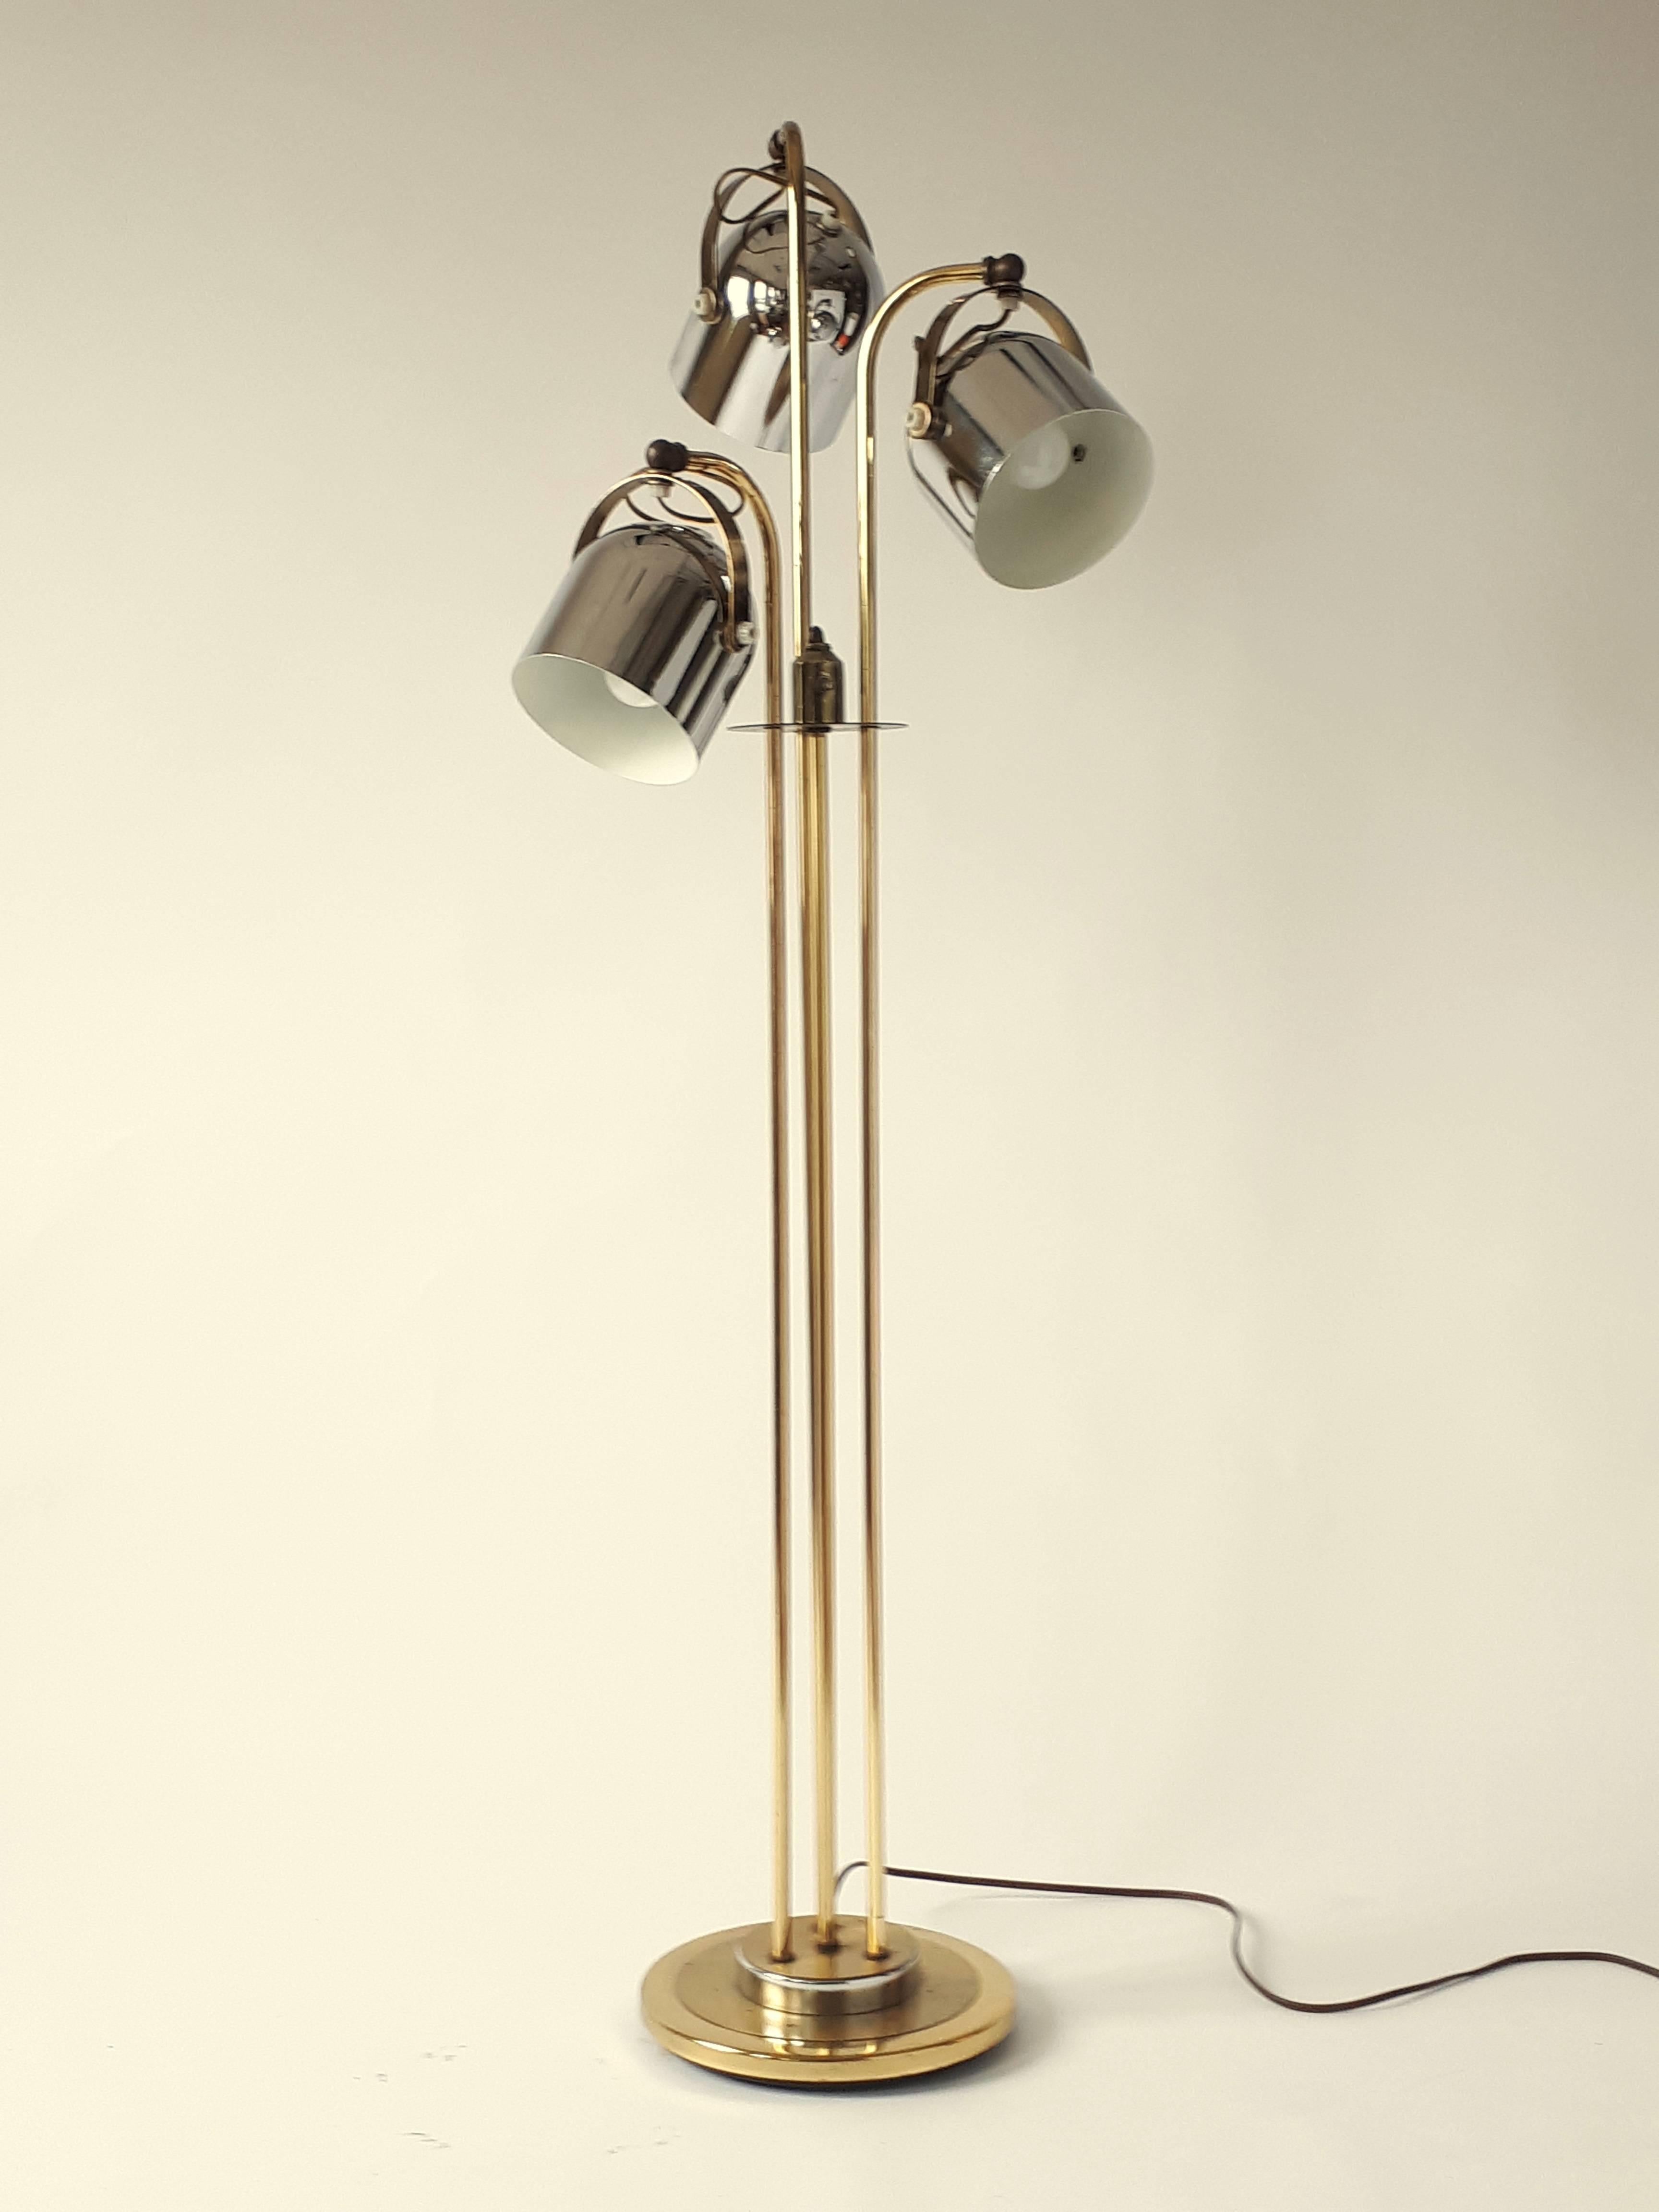 Brass plated structure and hardware.

Chrome stirrup and vented shade. 

Measure 51 inches high.
 